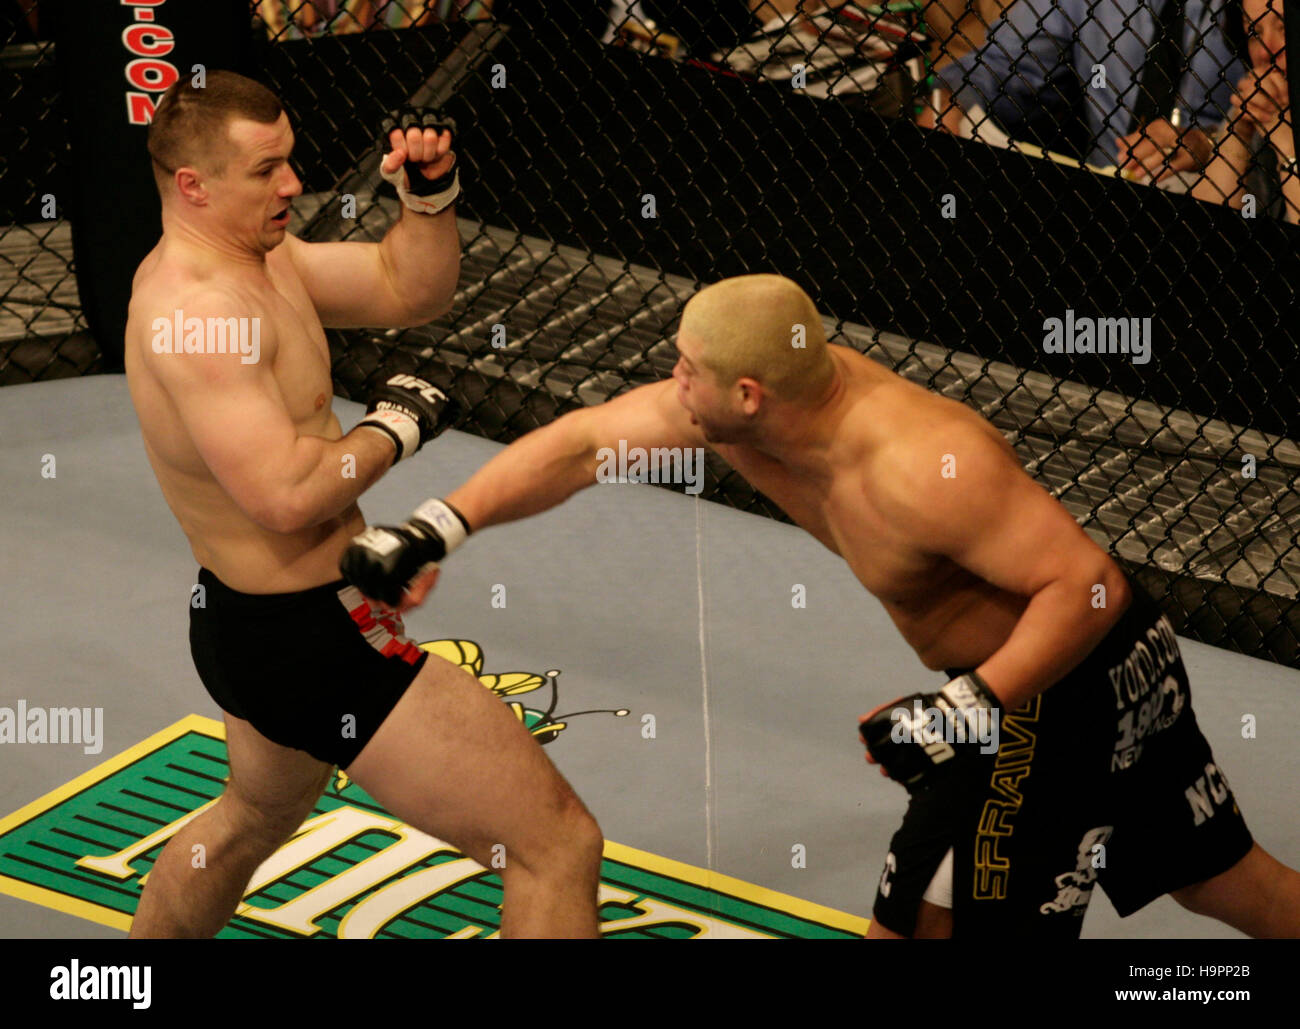 Mirko Cro Cop, left, fights Eddie Sanchez at the Ultimate Fighting Champion Championship UFC 67 at the Mandalay Bay Hotel in Las Vegas on Feb. 3, 2007. Photo credit: Francis Specker Stock Photo